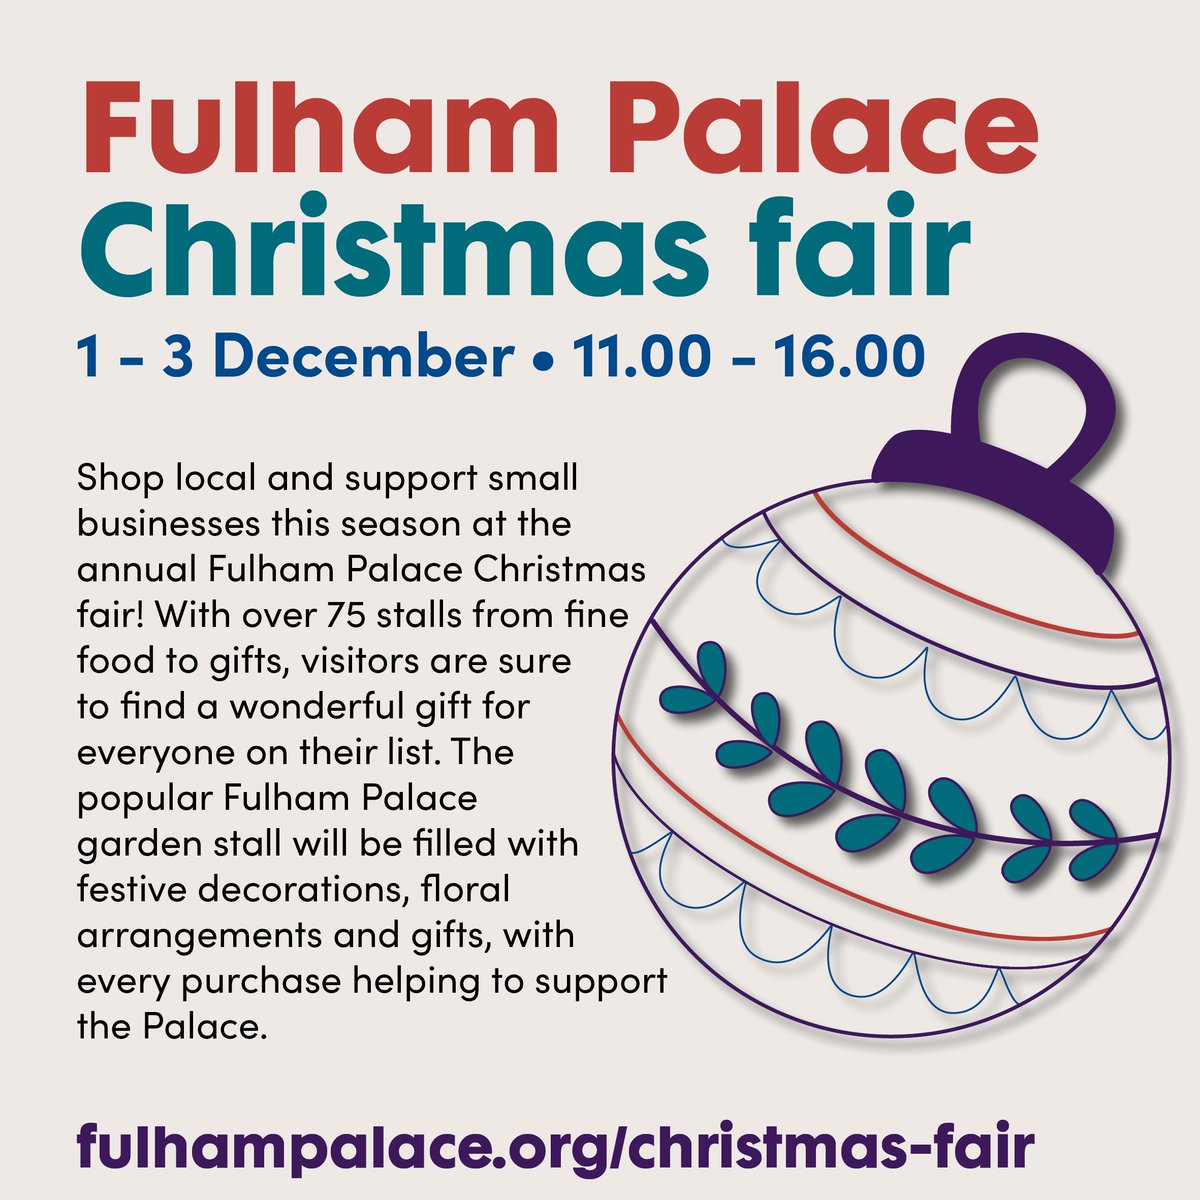 We're getting very Excited. And looking forward to 
welcoming one and all. Christmas Events @Fulham_Palace. #christmasmarket #chrismasfair #fulham #sw6 #fulham #carolsingers #familyactivities
#fulhampalace #giftideas #whatsonlondon #timeoutlondon #bishopoflondon #bishopspalace